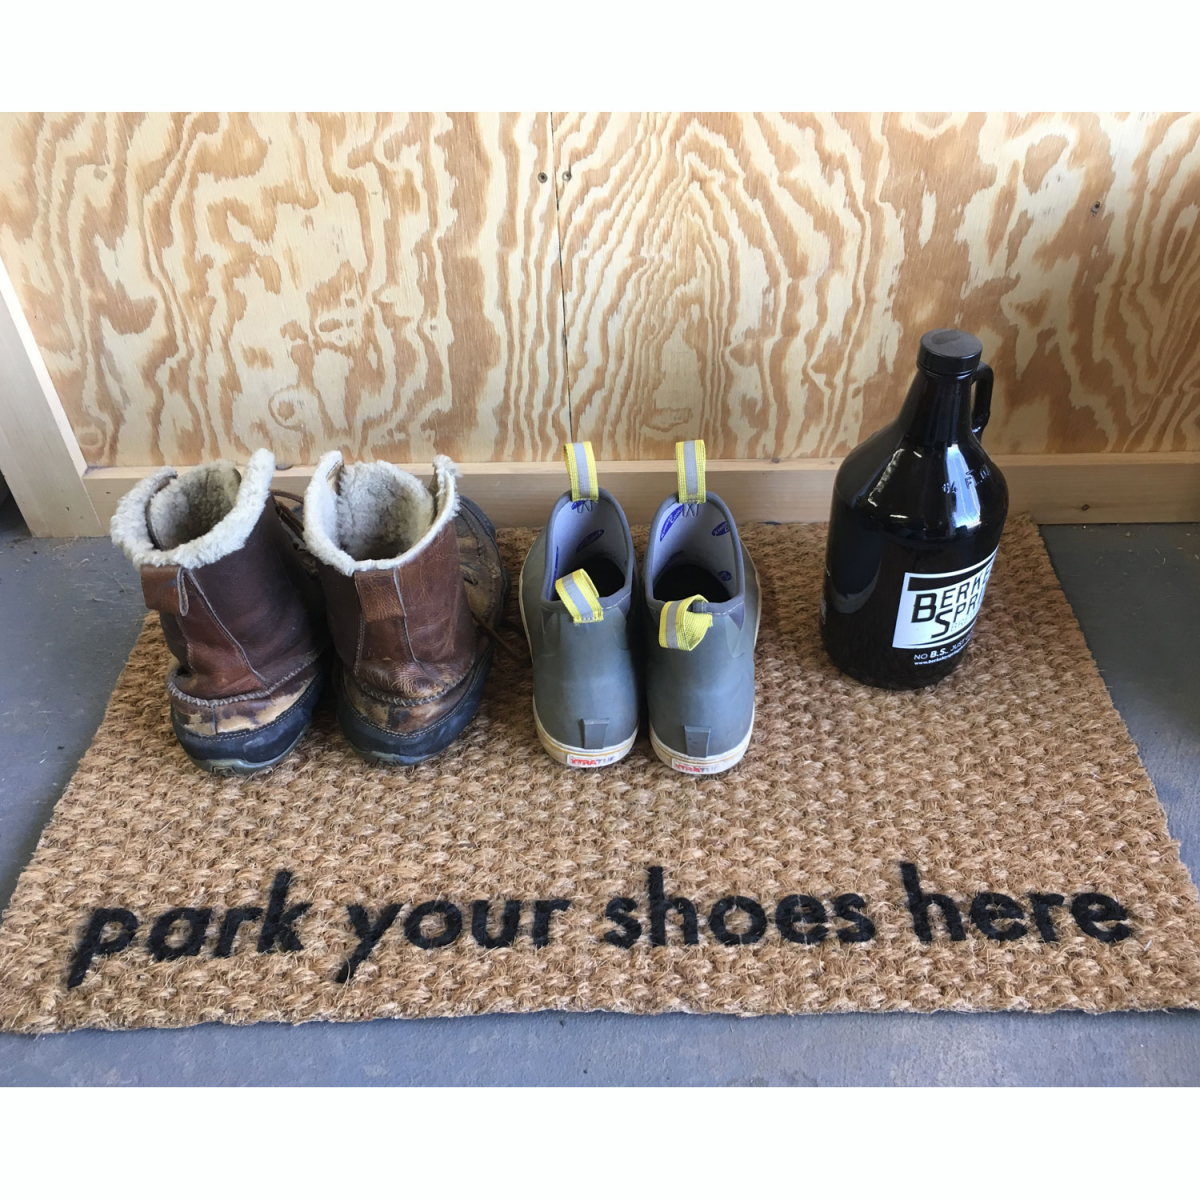 picture of woven coir doormat with words park your shoes here on it and several pairs of boots in a garage